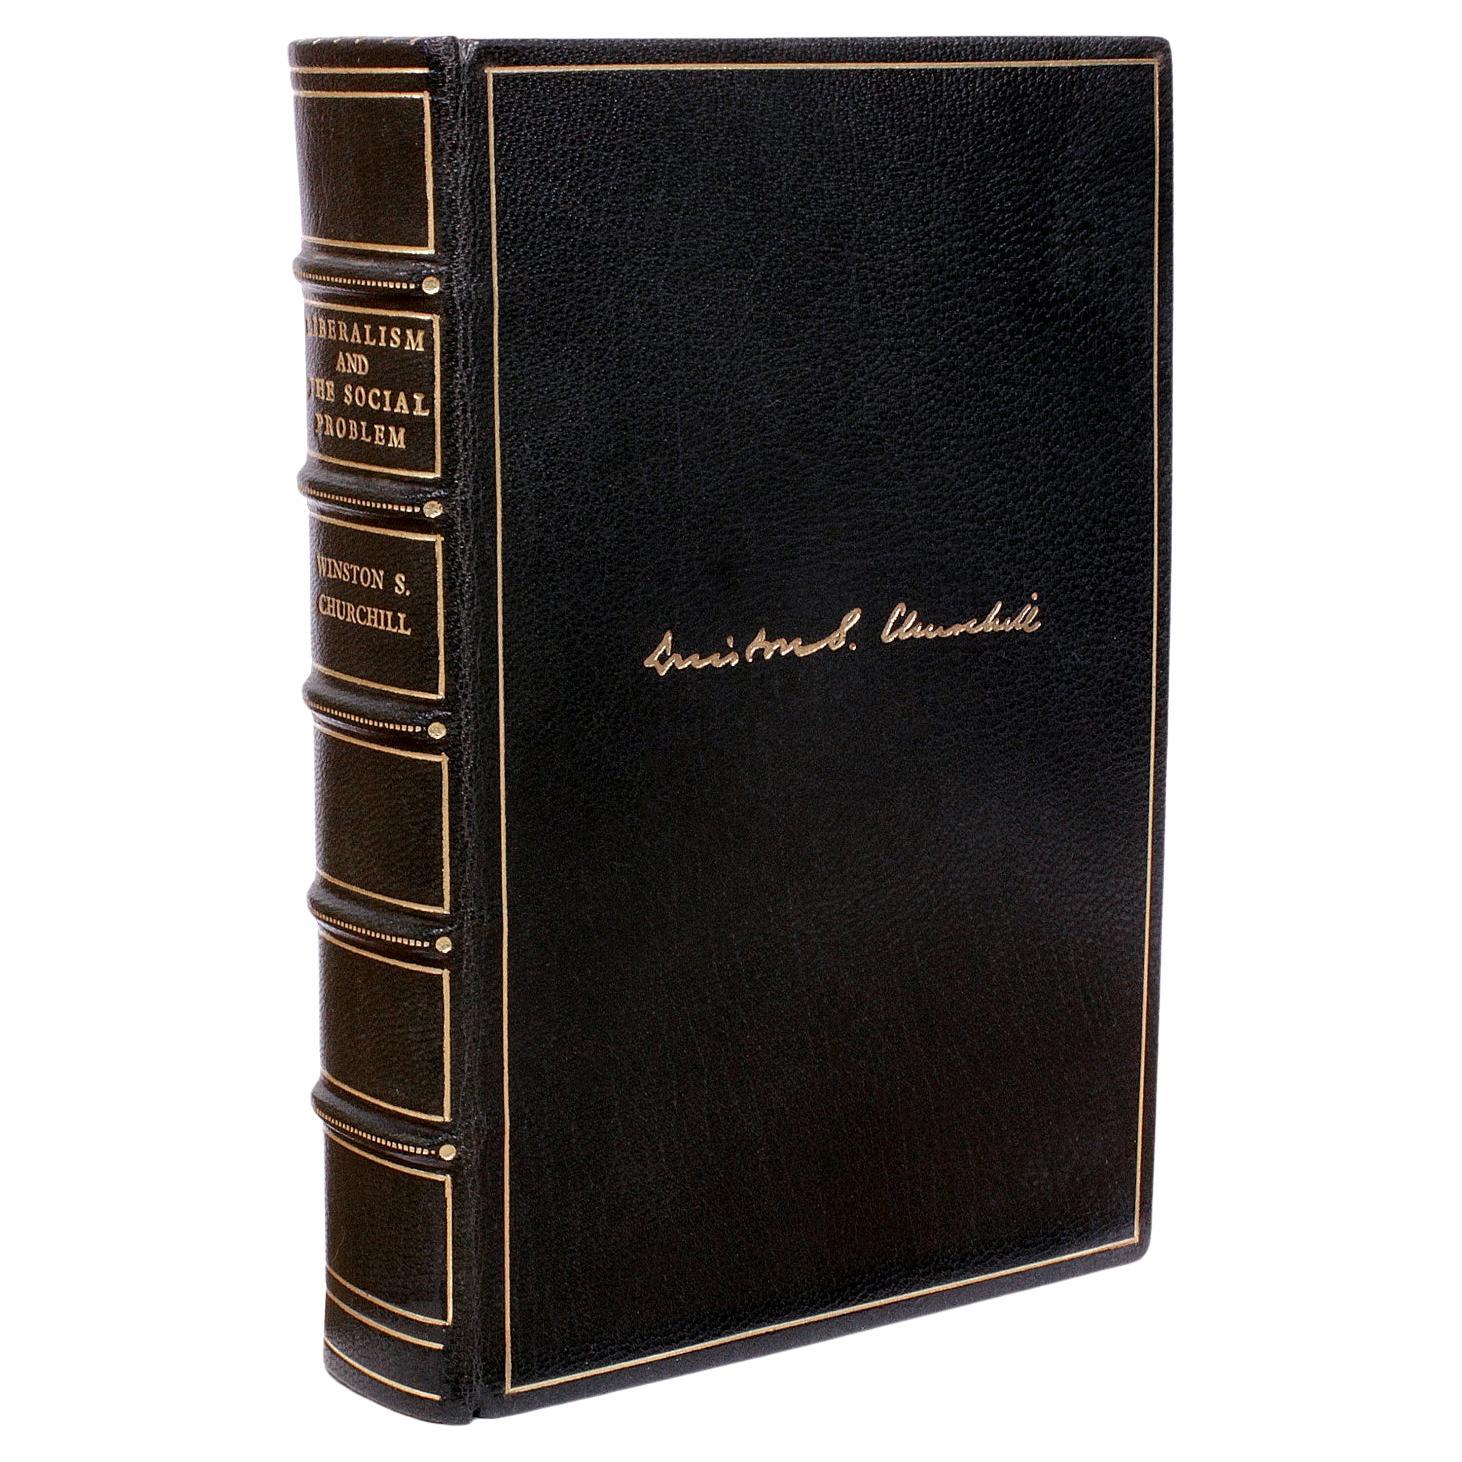 Winston CHURCHILL. Liberalism And The Social Problem - FIRST EDITION - 1909 For Sale